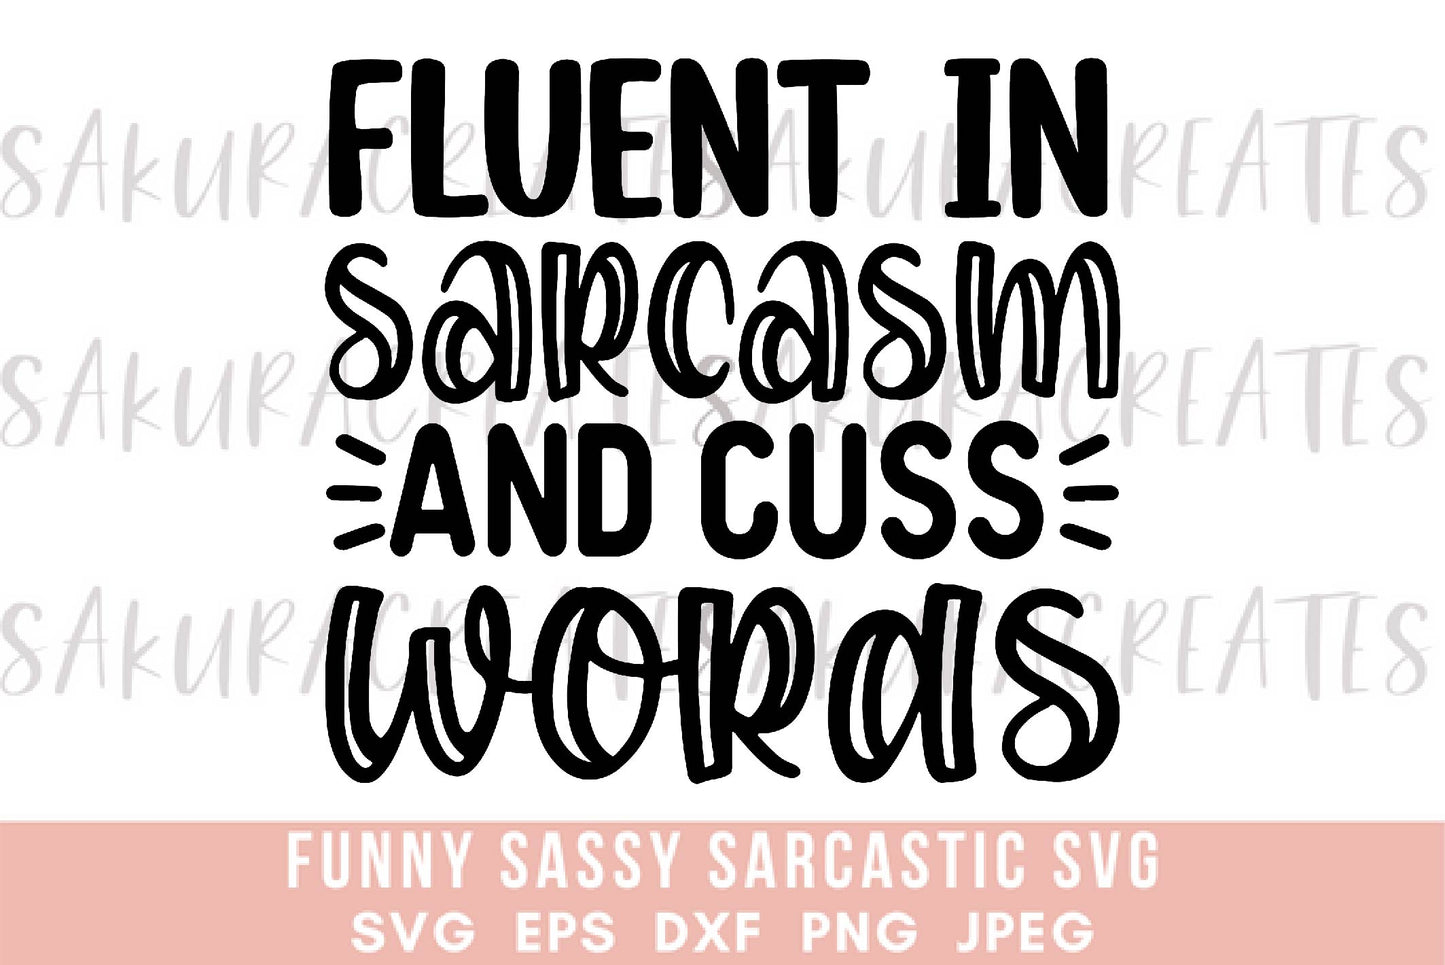 Fluent in sarcasm and curse words SVG DXF EPS PNG JPEG SVG cut file silhouette cricut funny sarcastic sassy quotes sayings